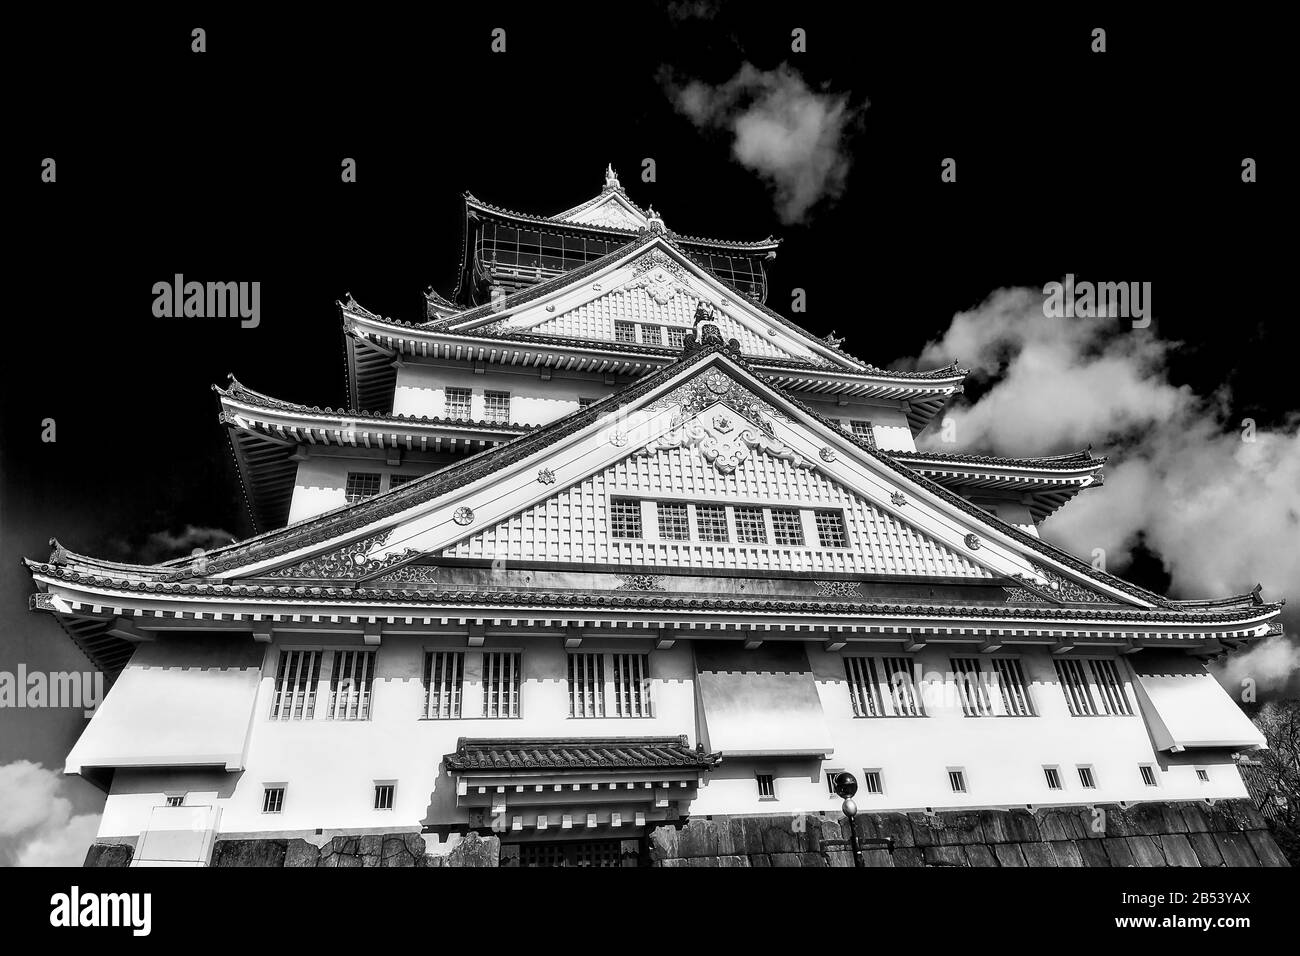 Contrast black-white facade of spectacular historic castle tower in Osaka city of Japan against clear sky. Stock Photo